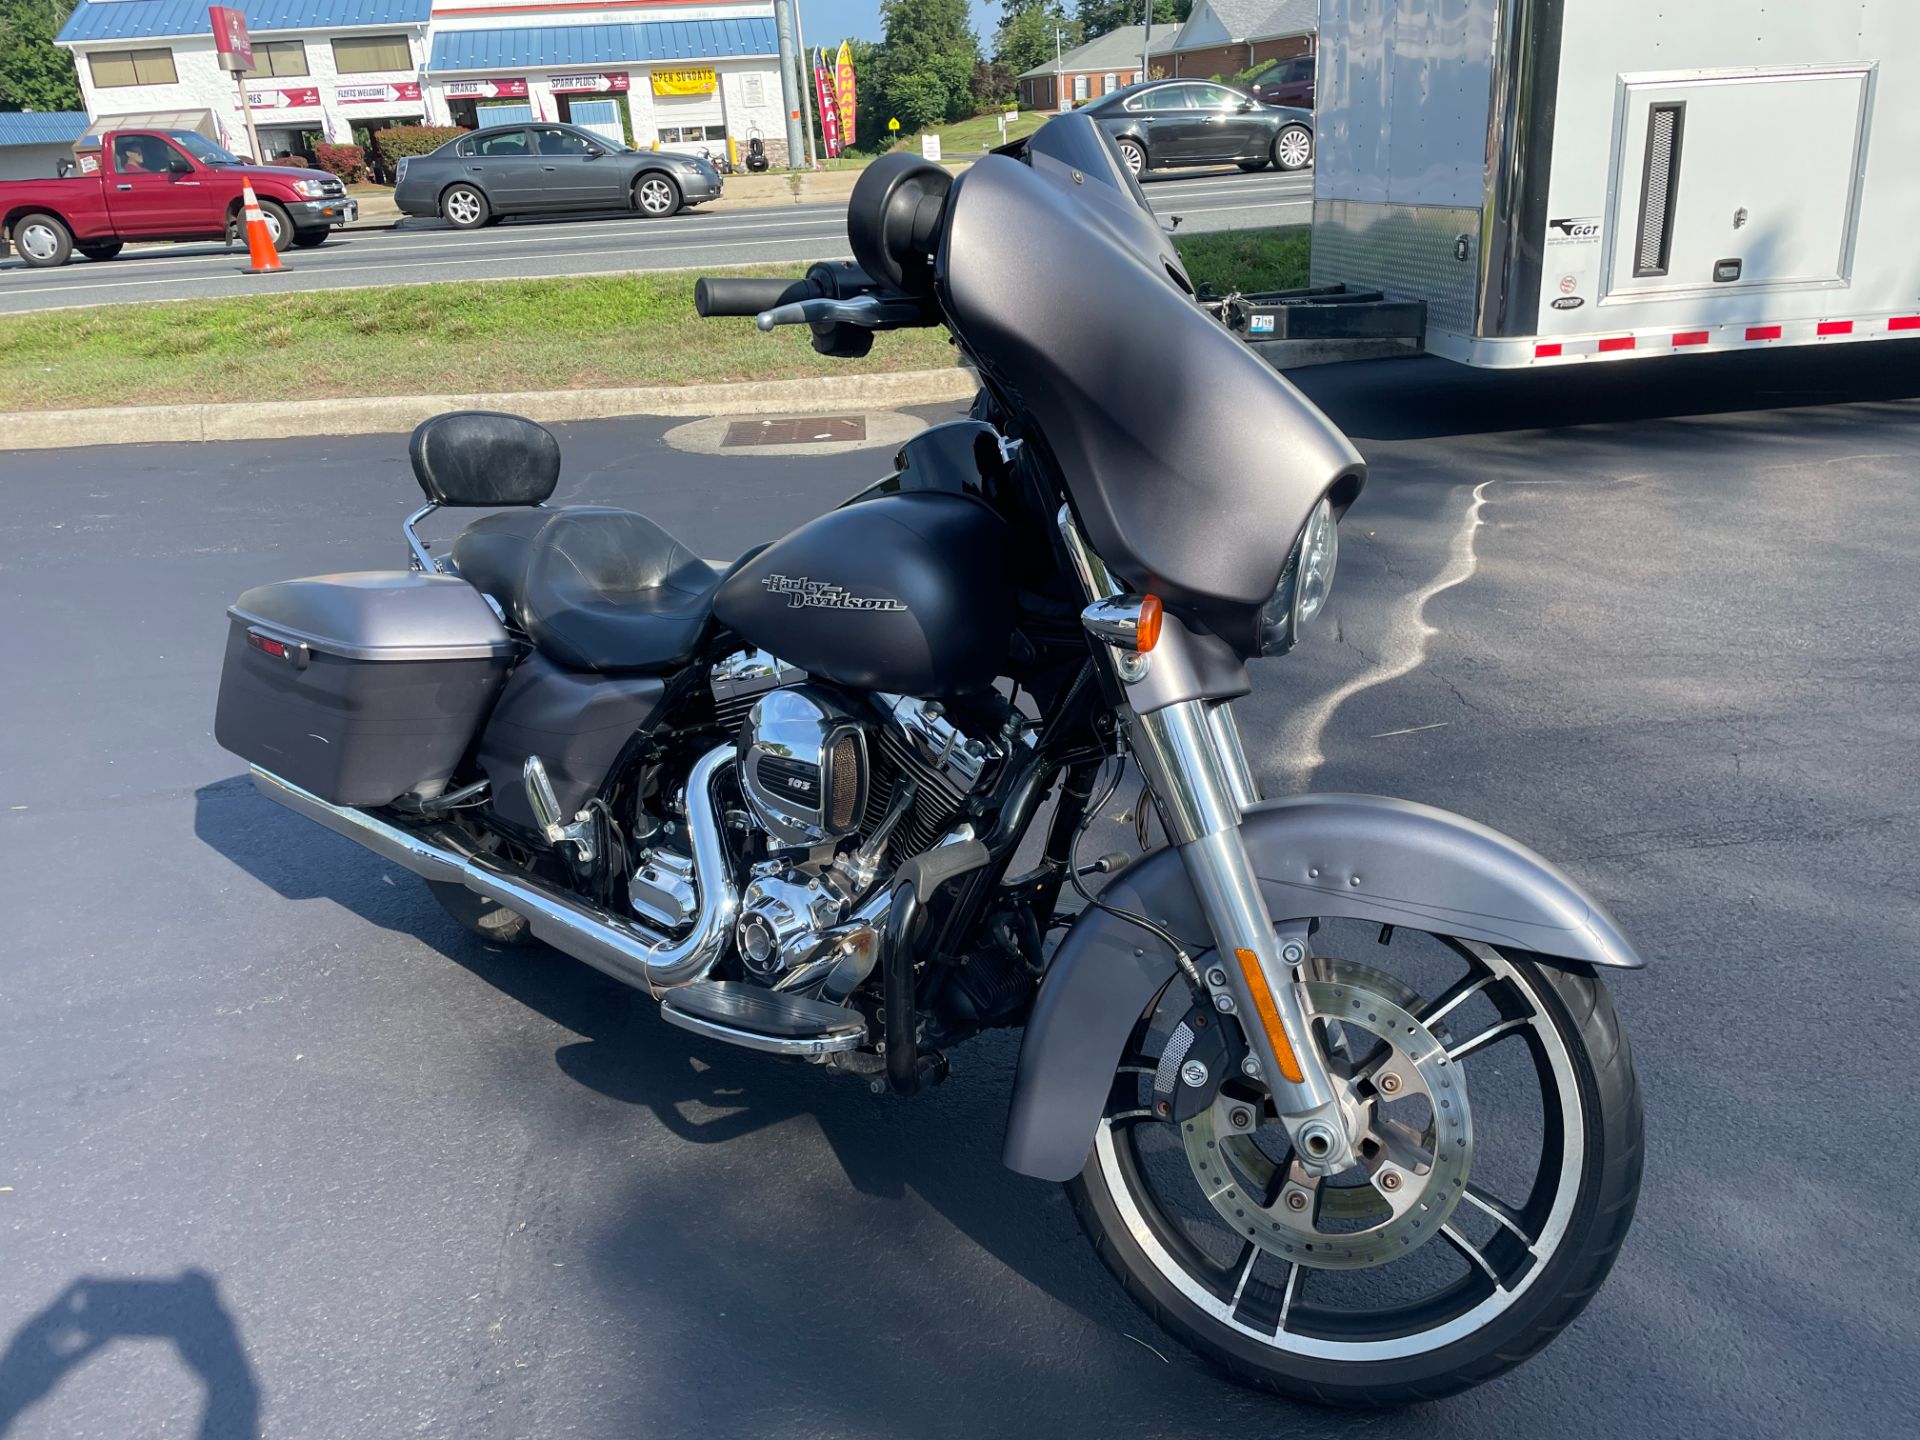 Used 2016 Harley Davidson Street Glide Special Charcoal Denim Motorcycles In Lynchburg Va 614437a